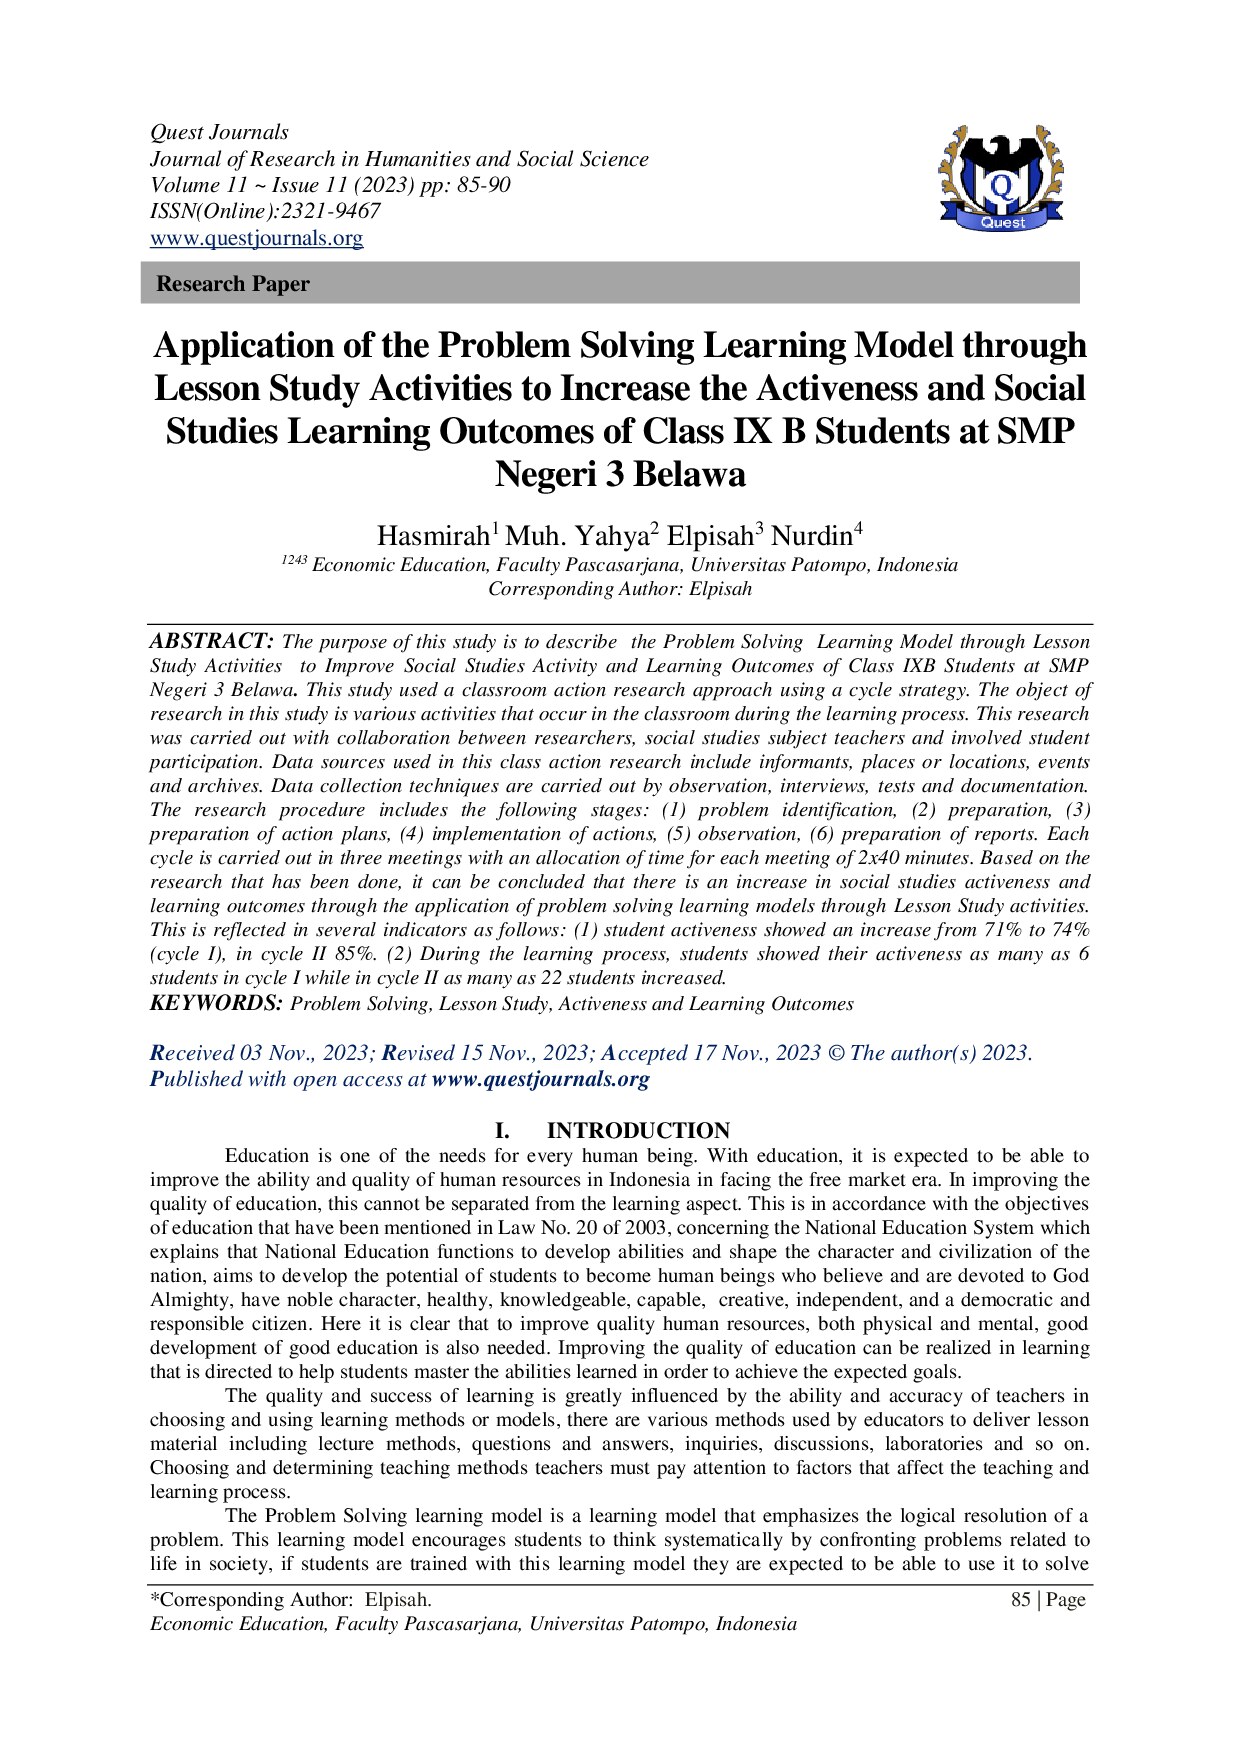 Application of the Problem Solving Learning Model through Lesson Study Activities to Increase the Activeness and Social Studies Learning Outcomes of Class IX B Students at SMP Negeri 3